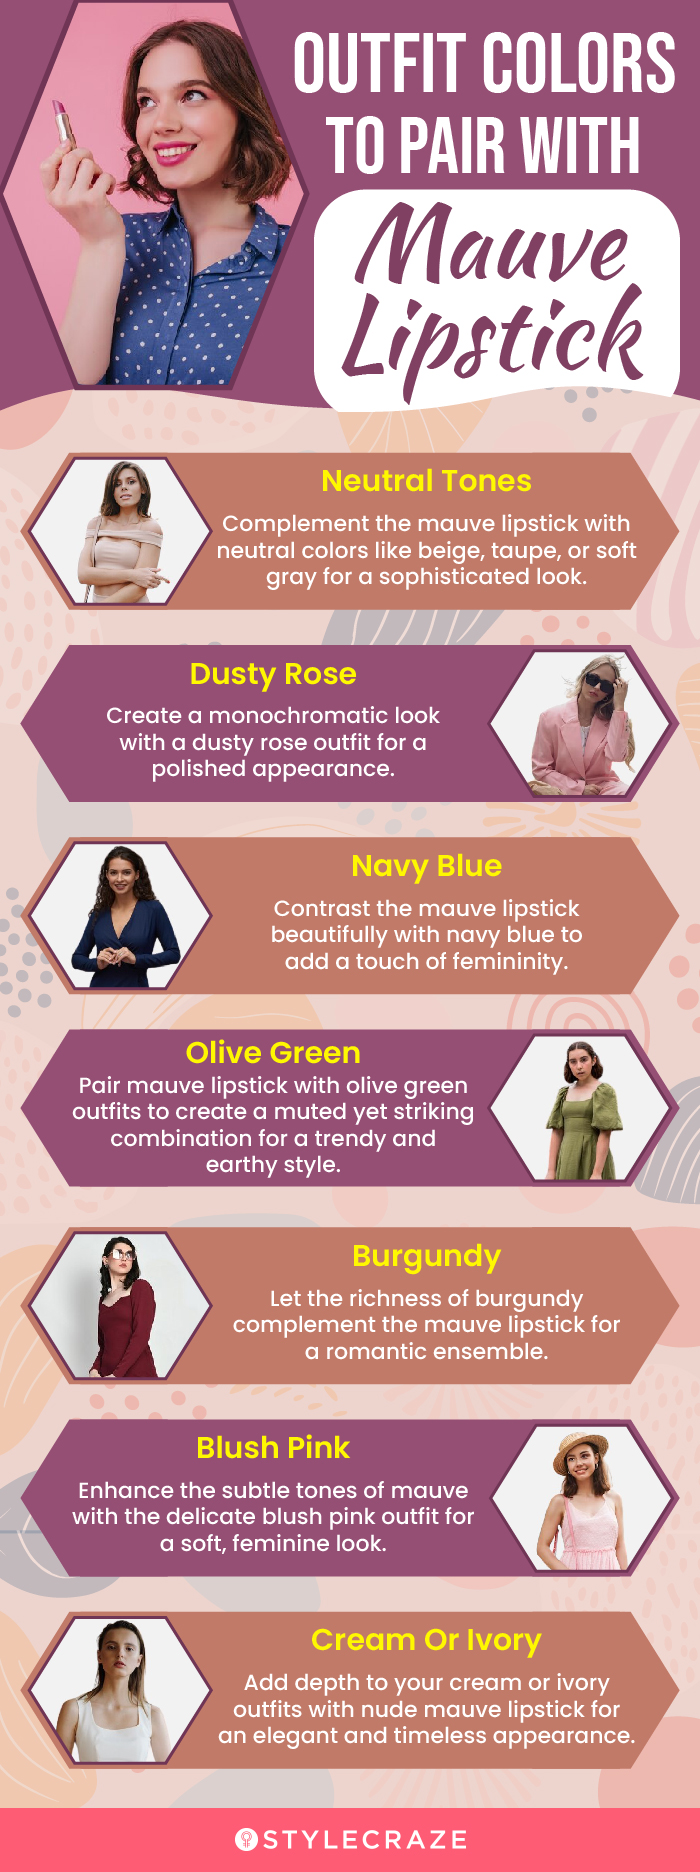 Outfit Colors To Pair With Mauve Lipstick (infographic)